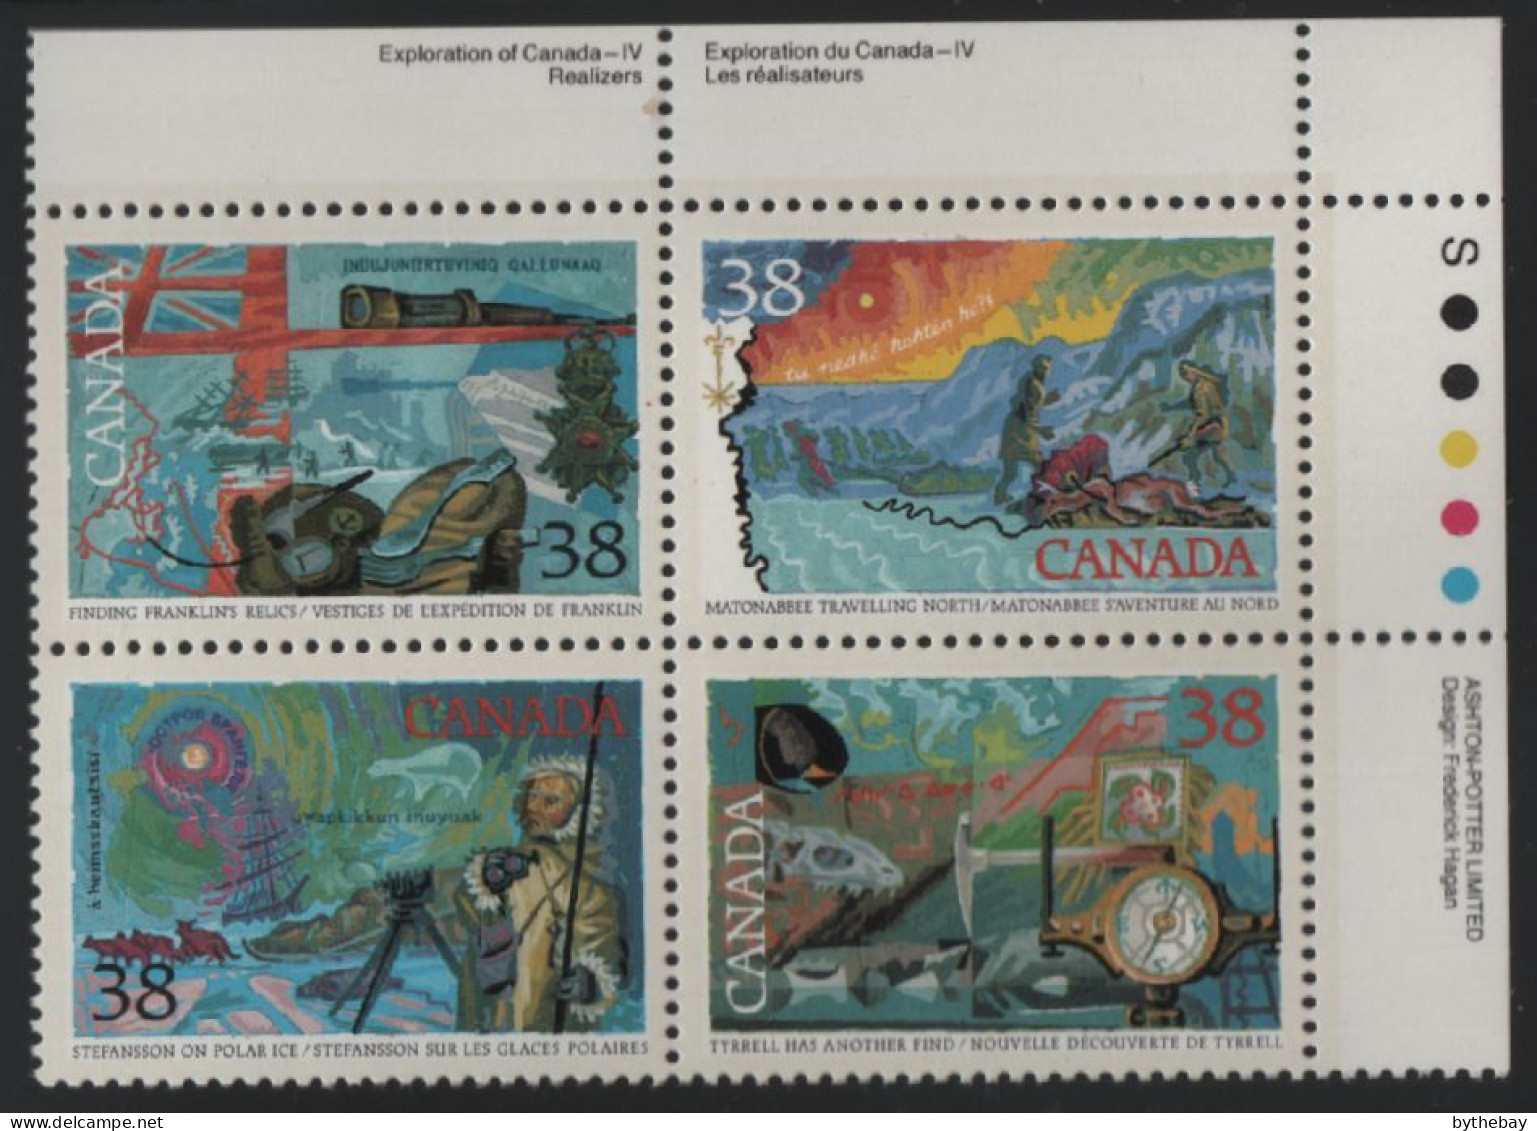 Canada 1989 MNH Sc 1236a 38c Explorers Of The North UR Plate Block - Plate Number & Inscriptions